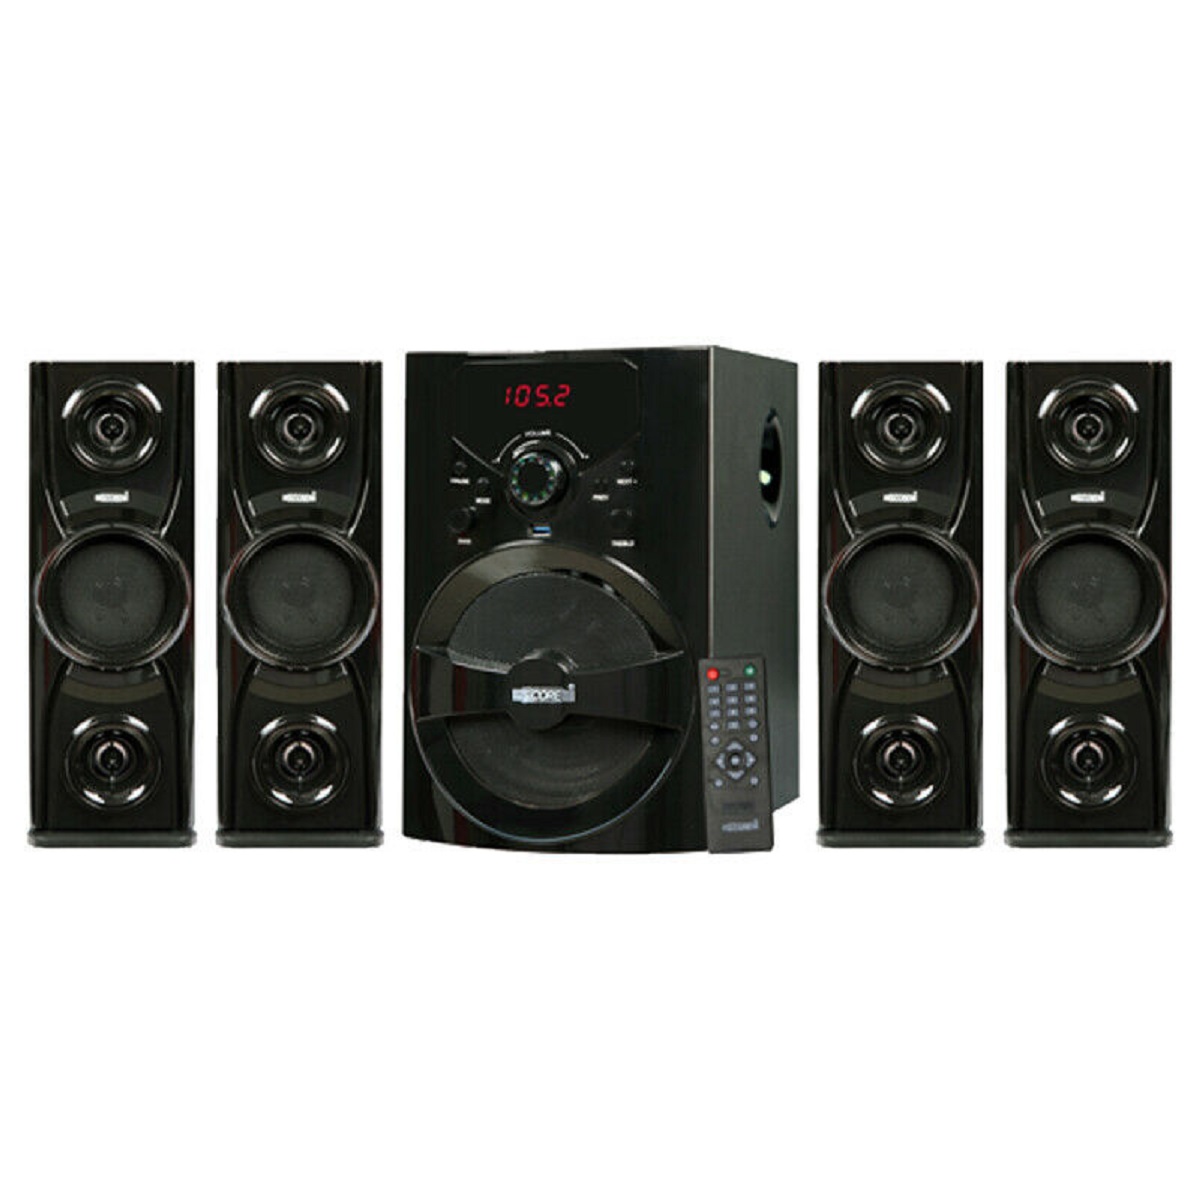 5 Core Home Theater Speaker Set 8 inch 4.1 Channel System Bluetooth Surround Speakers HT4123 - image 1 of 9